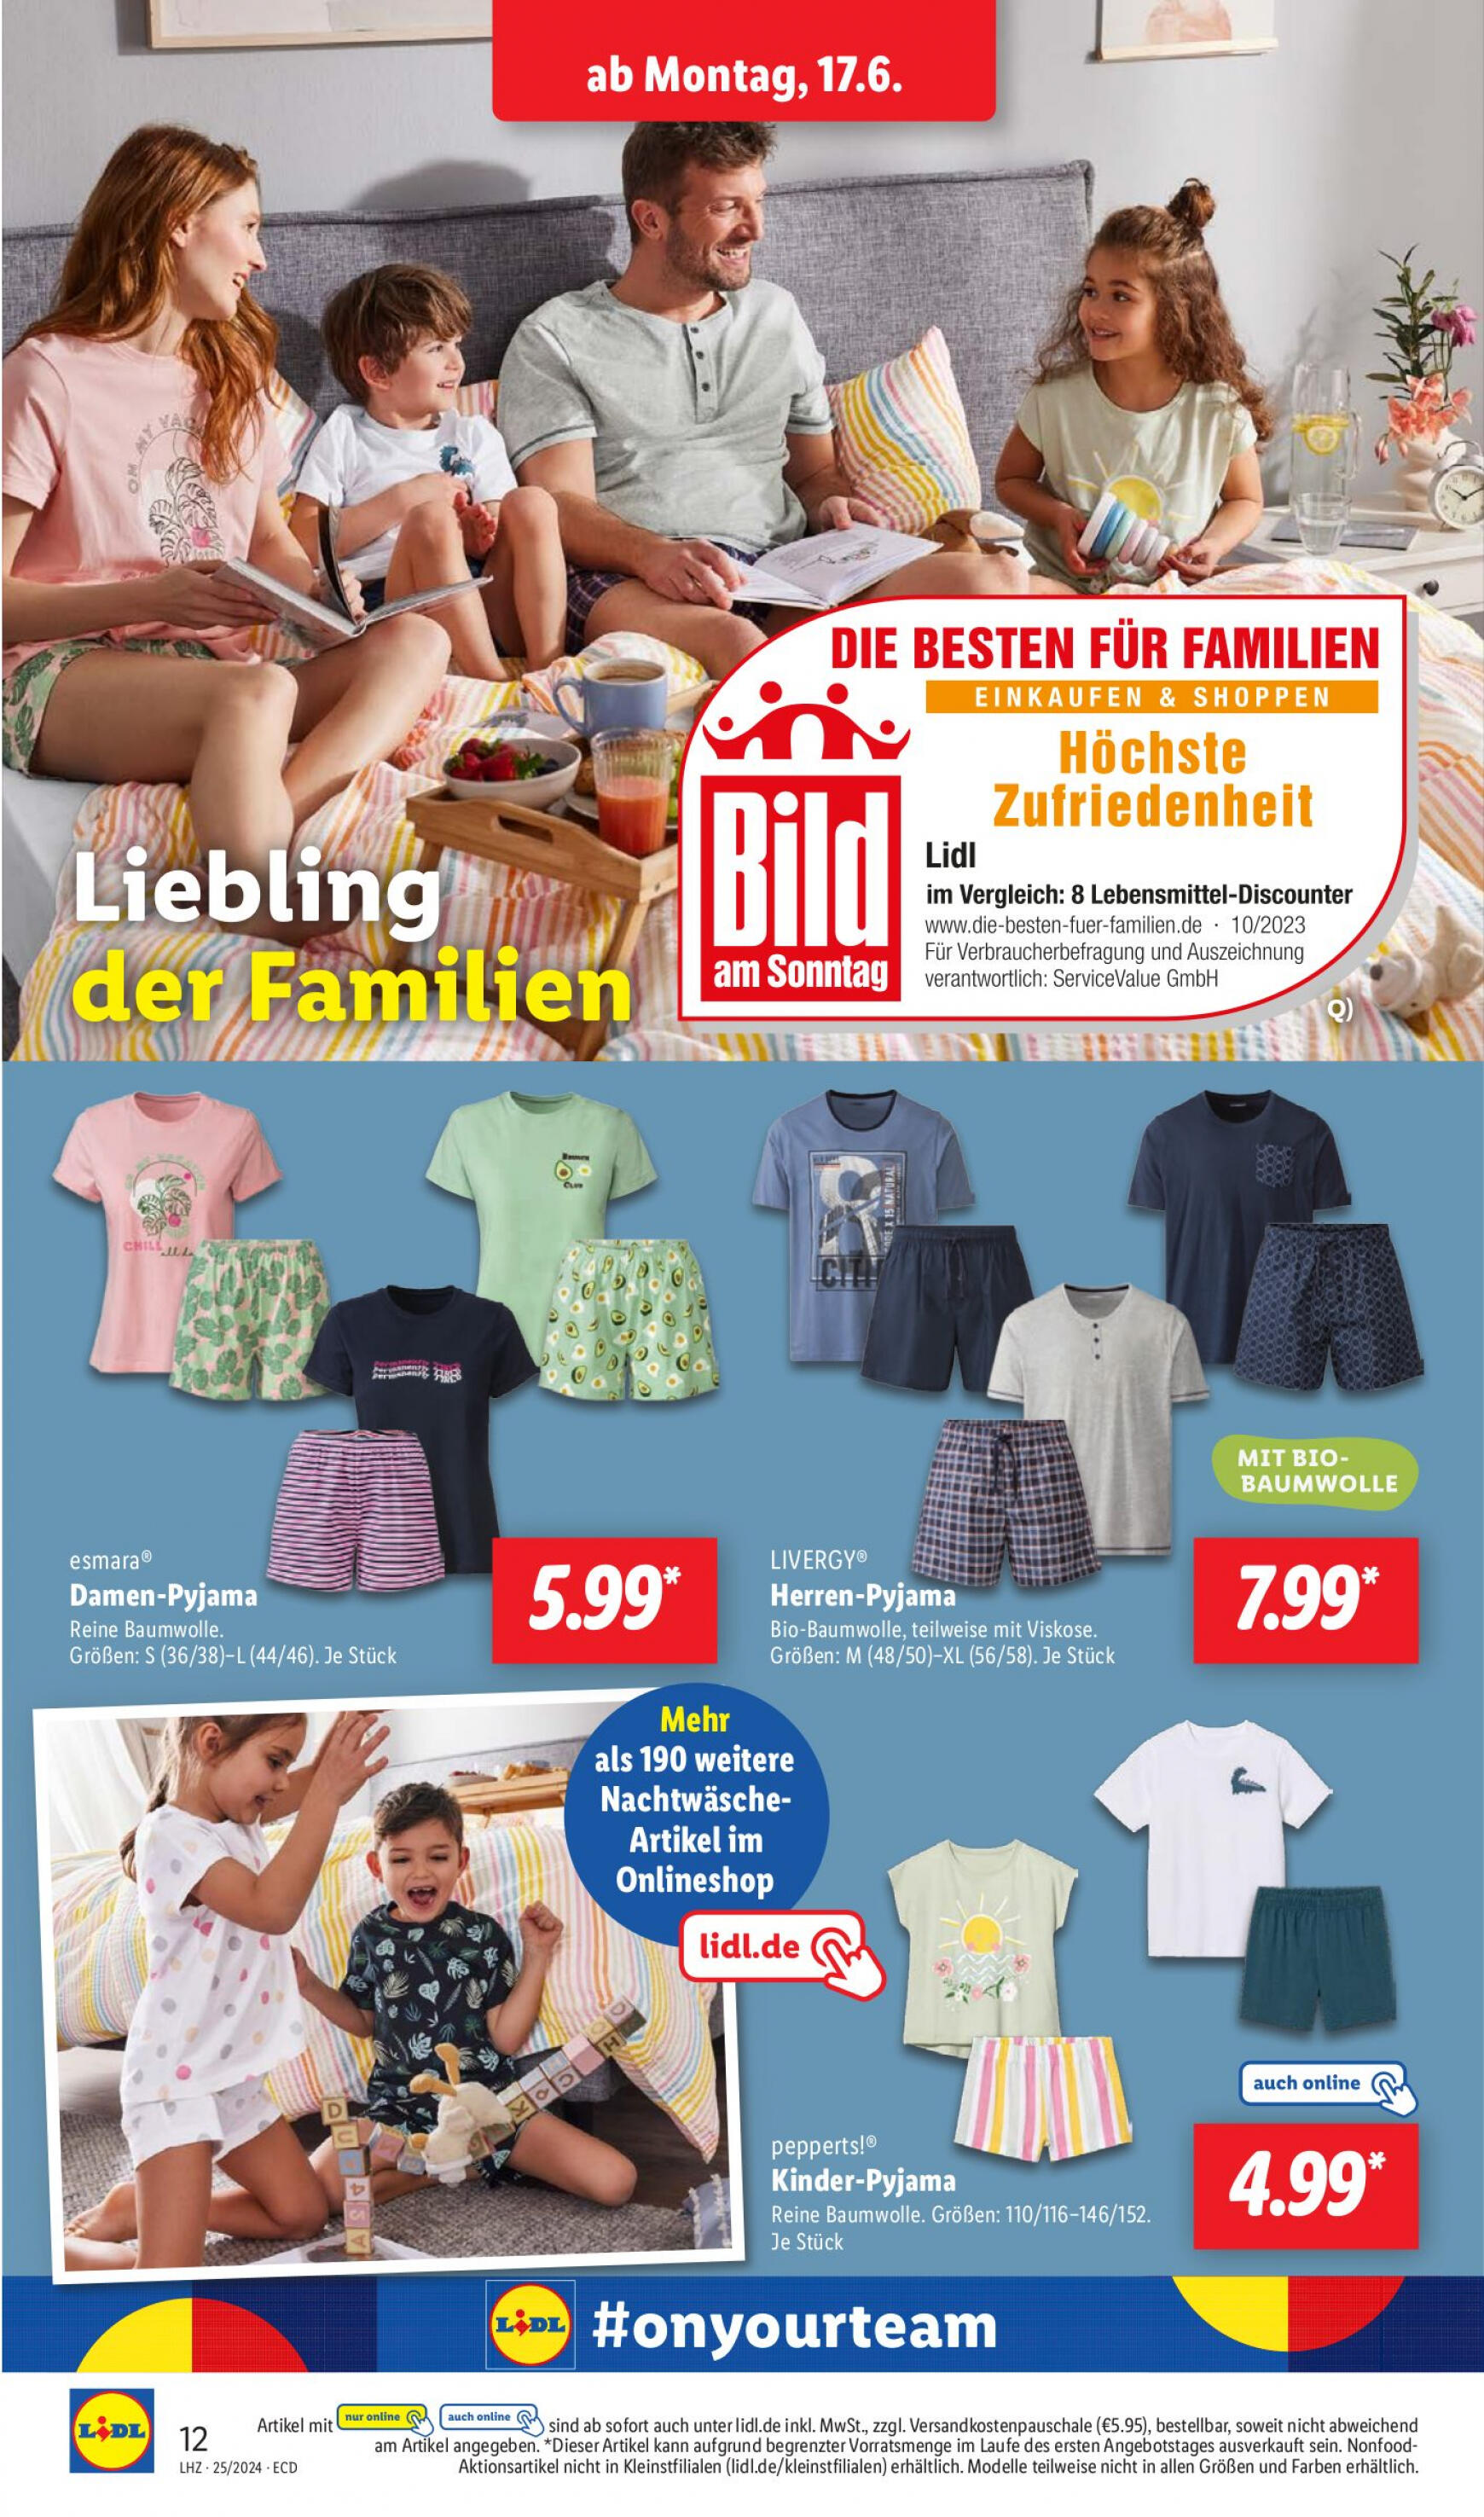 lidl - Flyer Lidl aktuell 17.06. - 22.06. - page: 16